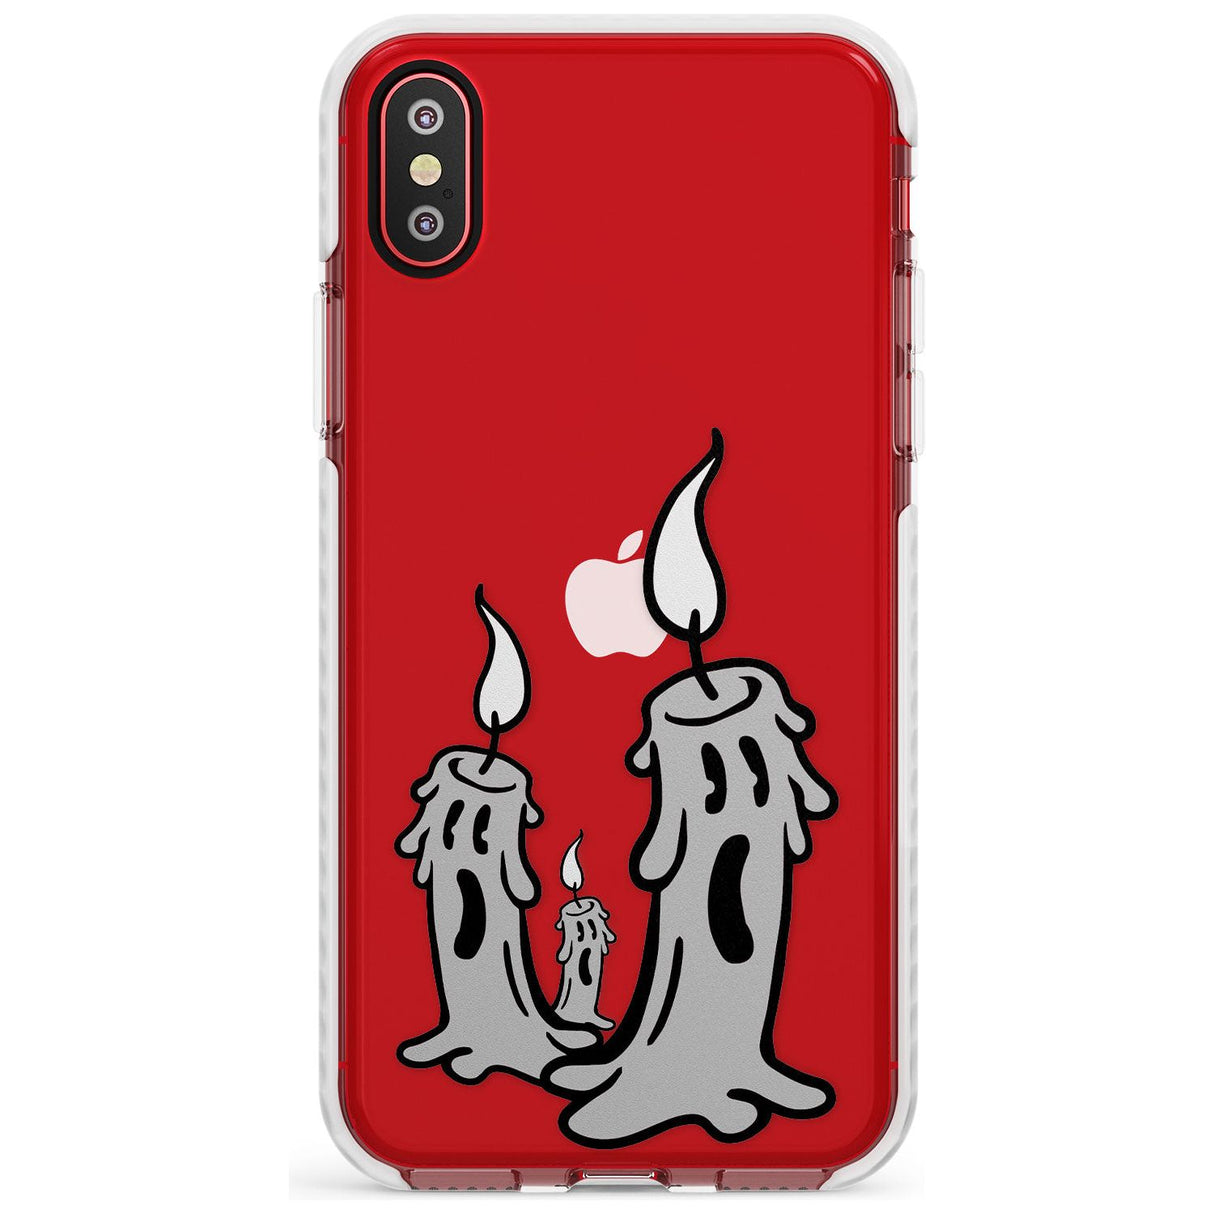 Candle Lit Impact Phone Case for iPhone X XS Max XR